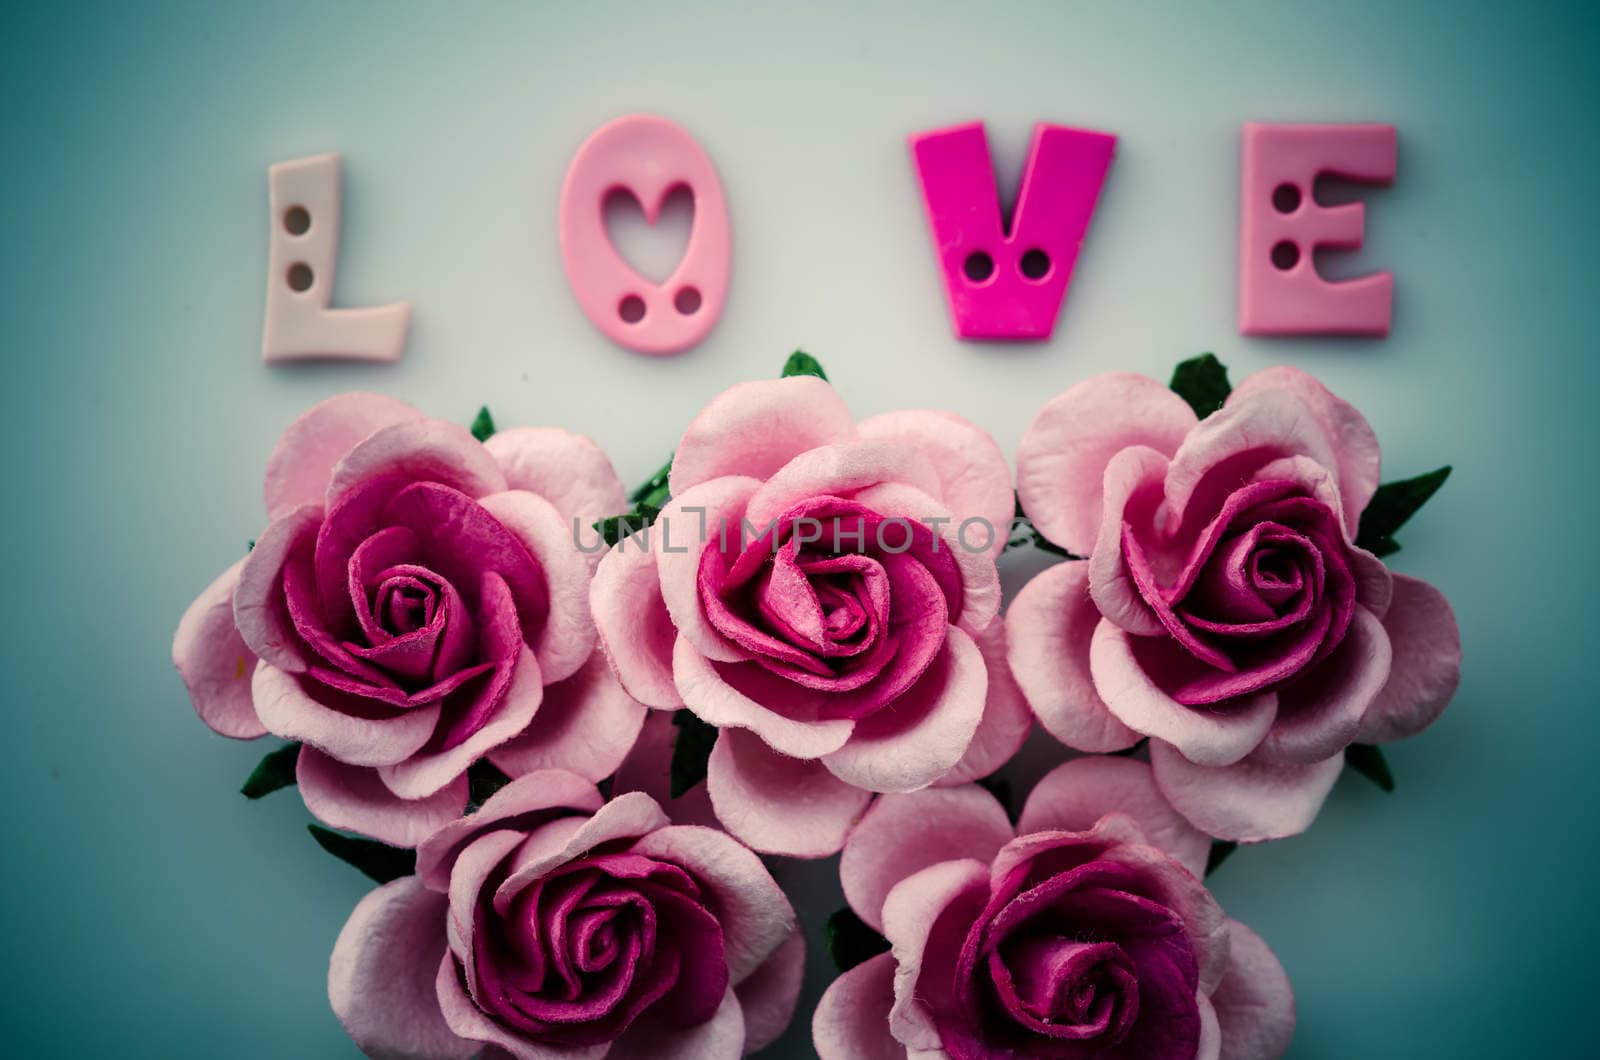 Vintage pink roses flower and love text on blue background.